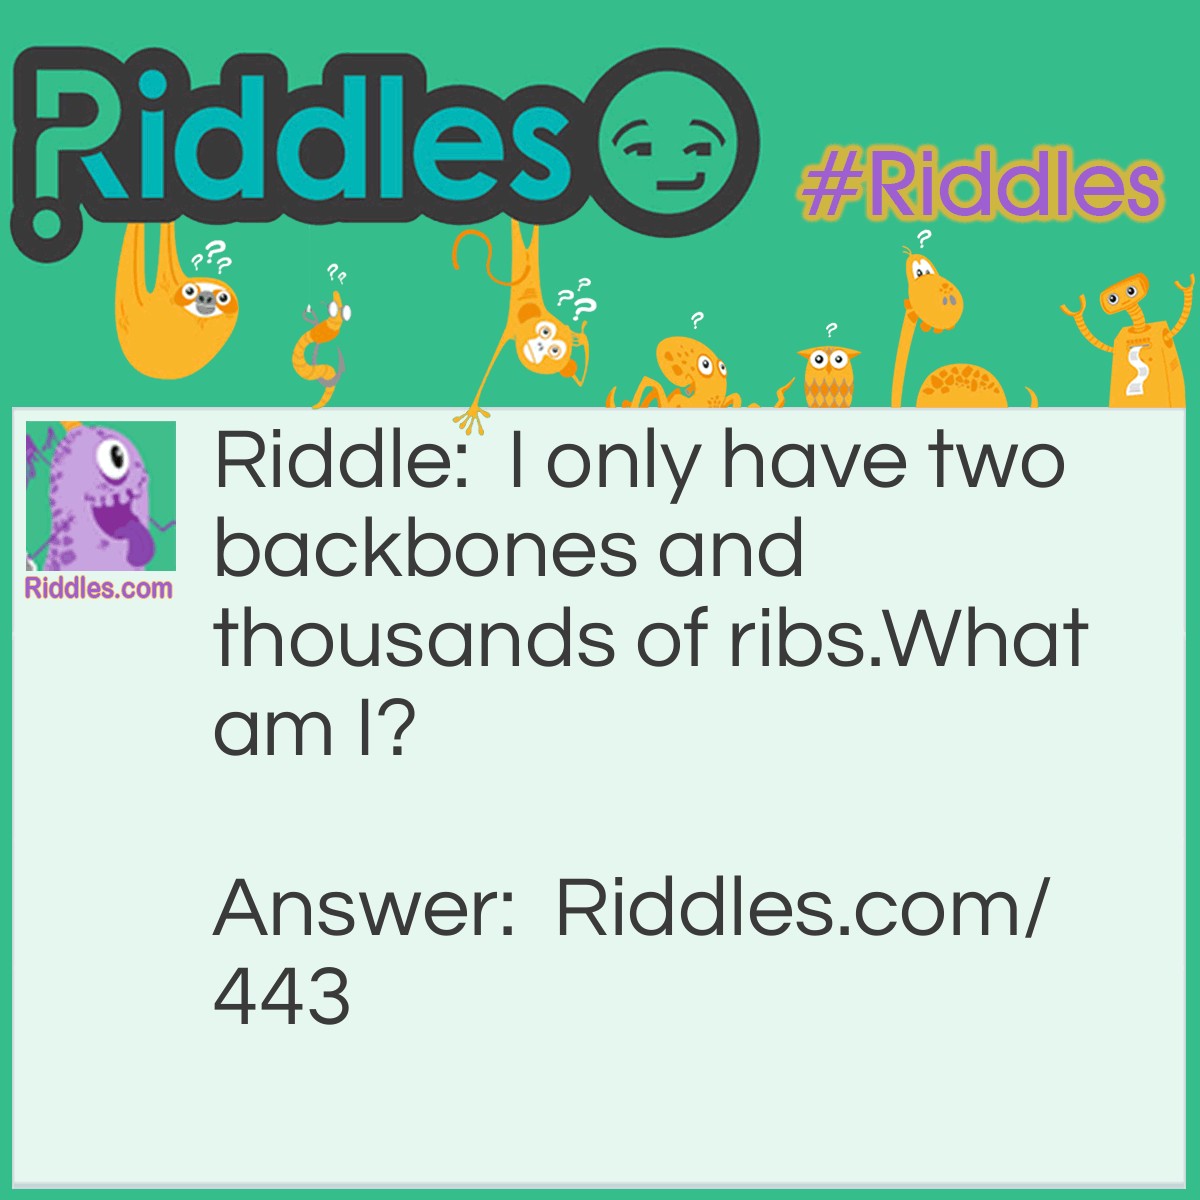 Riddle: I only have two backbones and thousands of ribs. 
What am I? Answer: A railroad.